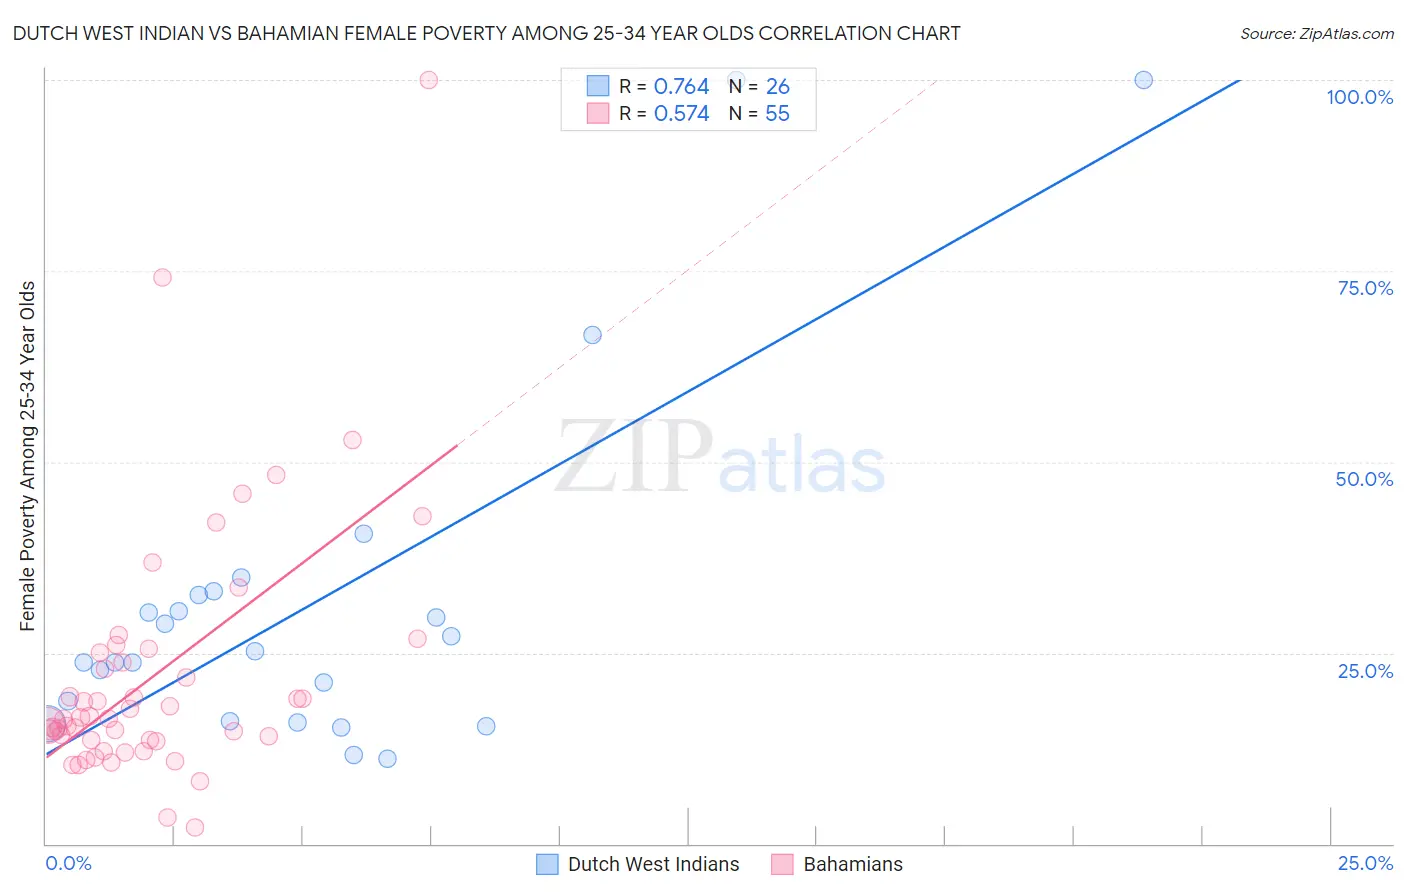 Dutch West Indian vs Bahamian Female Poverty Among 25-34 Year Olds